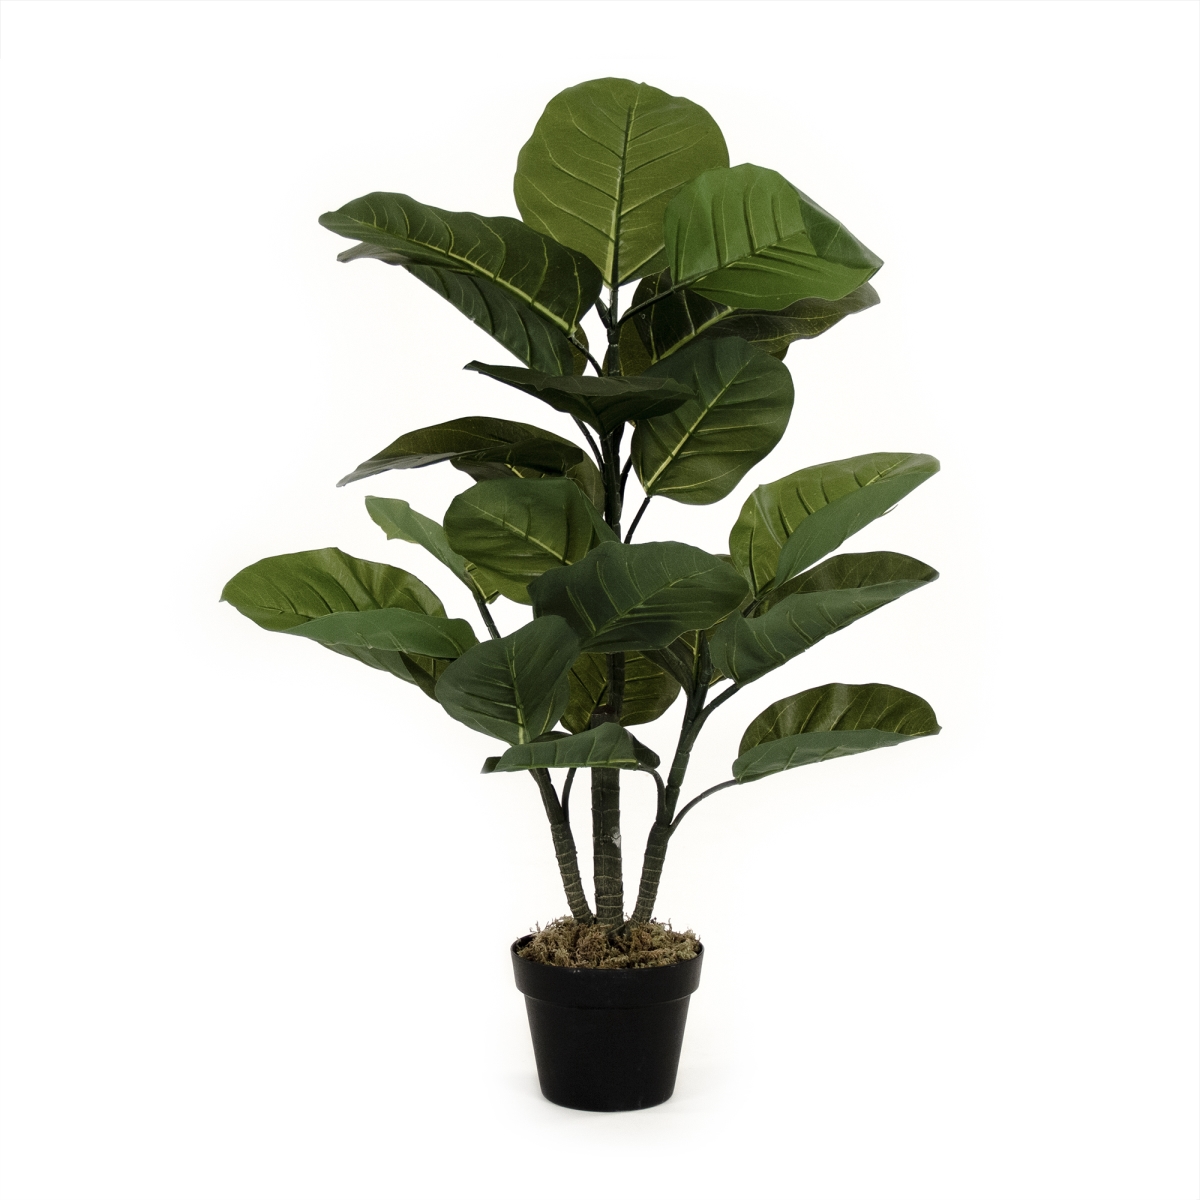 Zen-180503-58 Brown Leafed House Plant In Pot, 58 In.